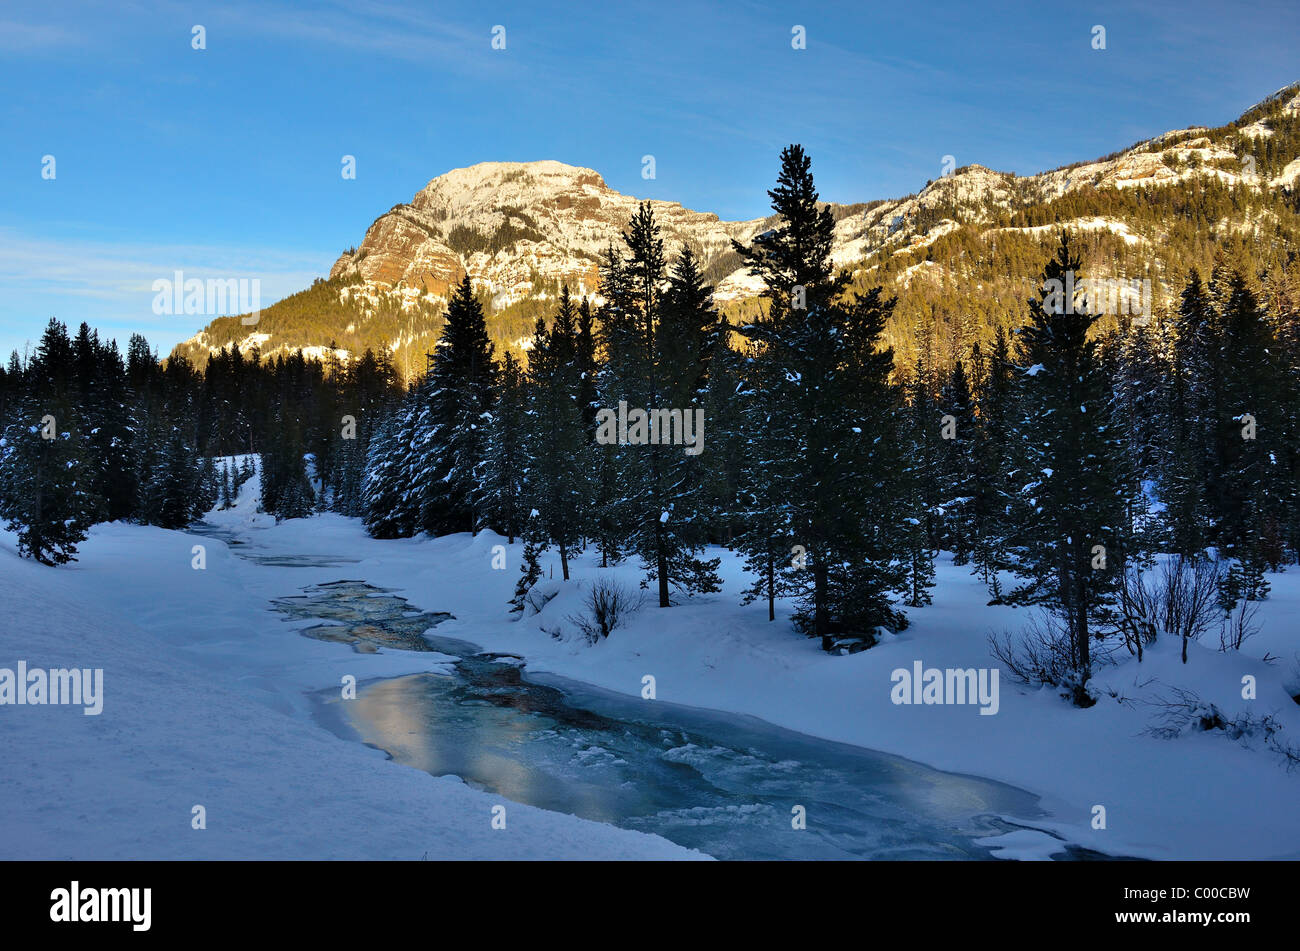 Mountains and frozen stream. Lamar Valley, Yellowstone National Park, Wyoming, USA. Stock Photo